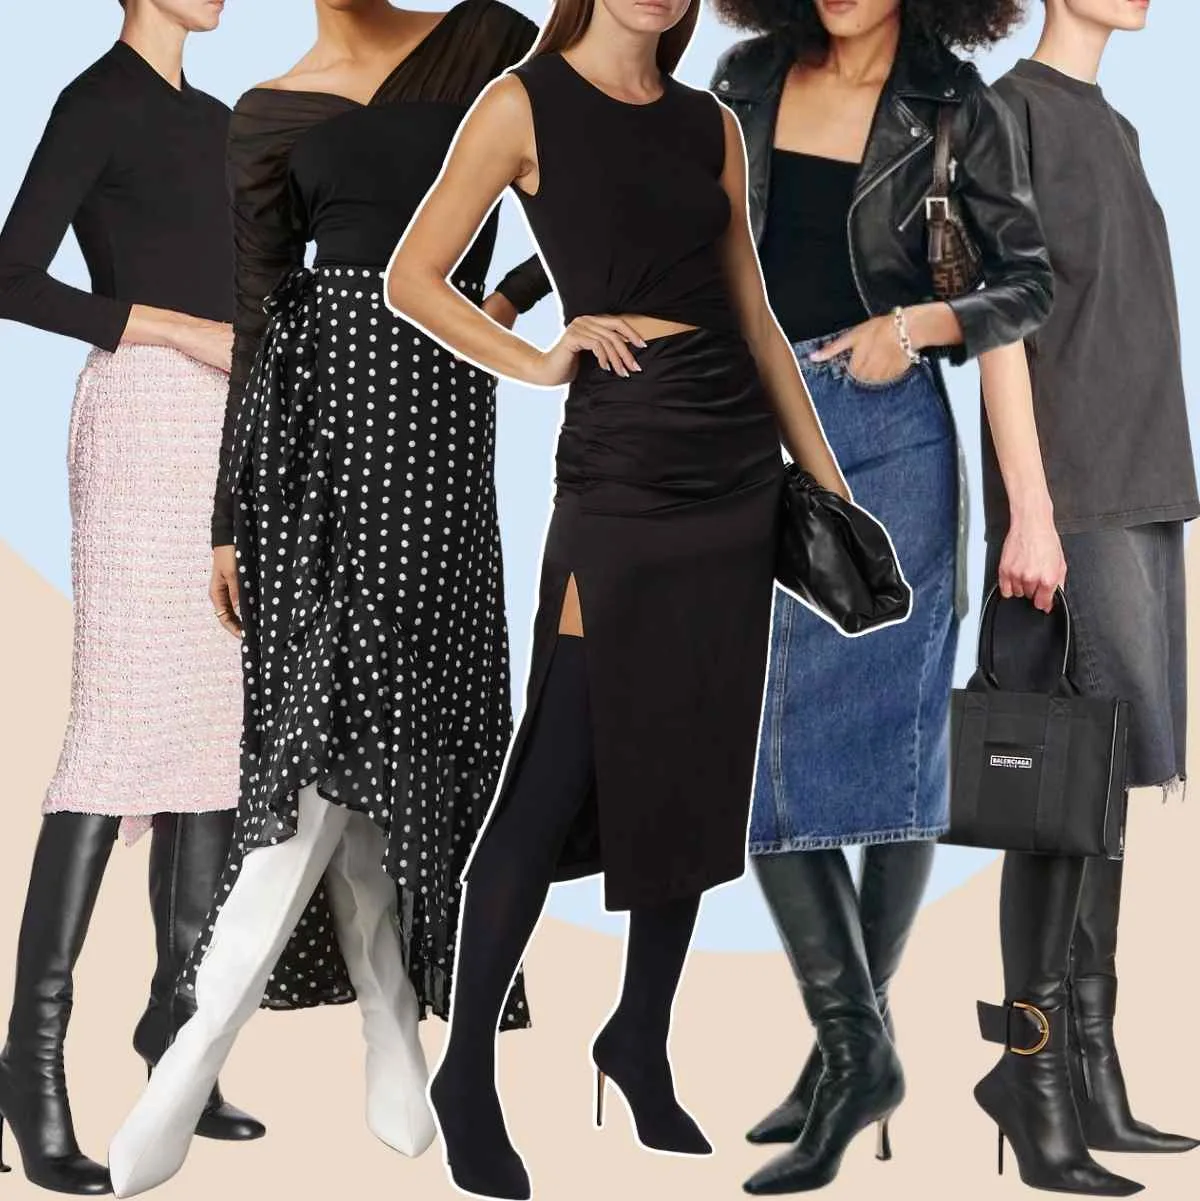 Collage of 5 women wearing thigh high boots outfits with midi skirts.